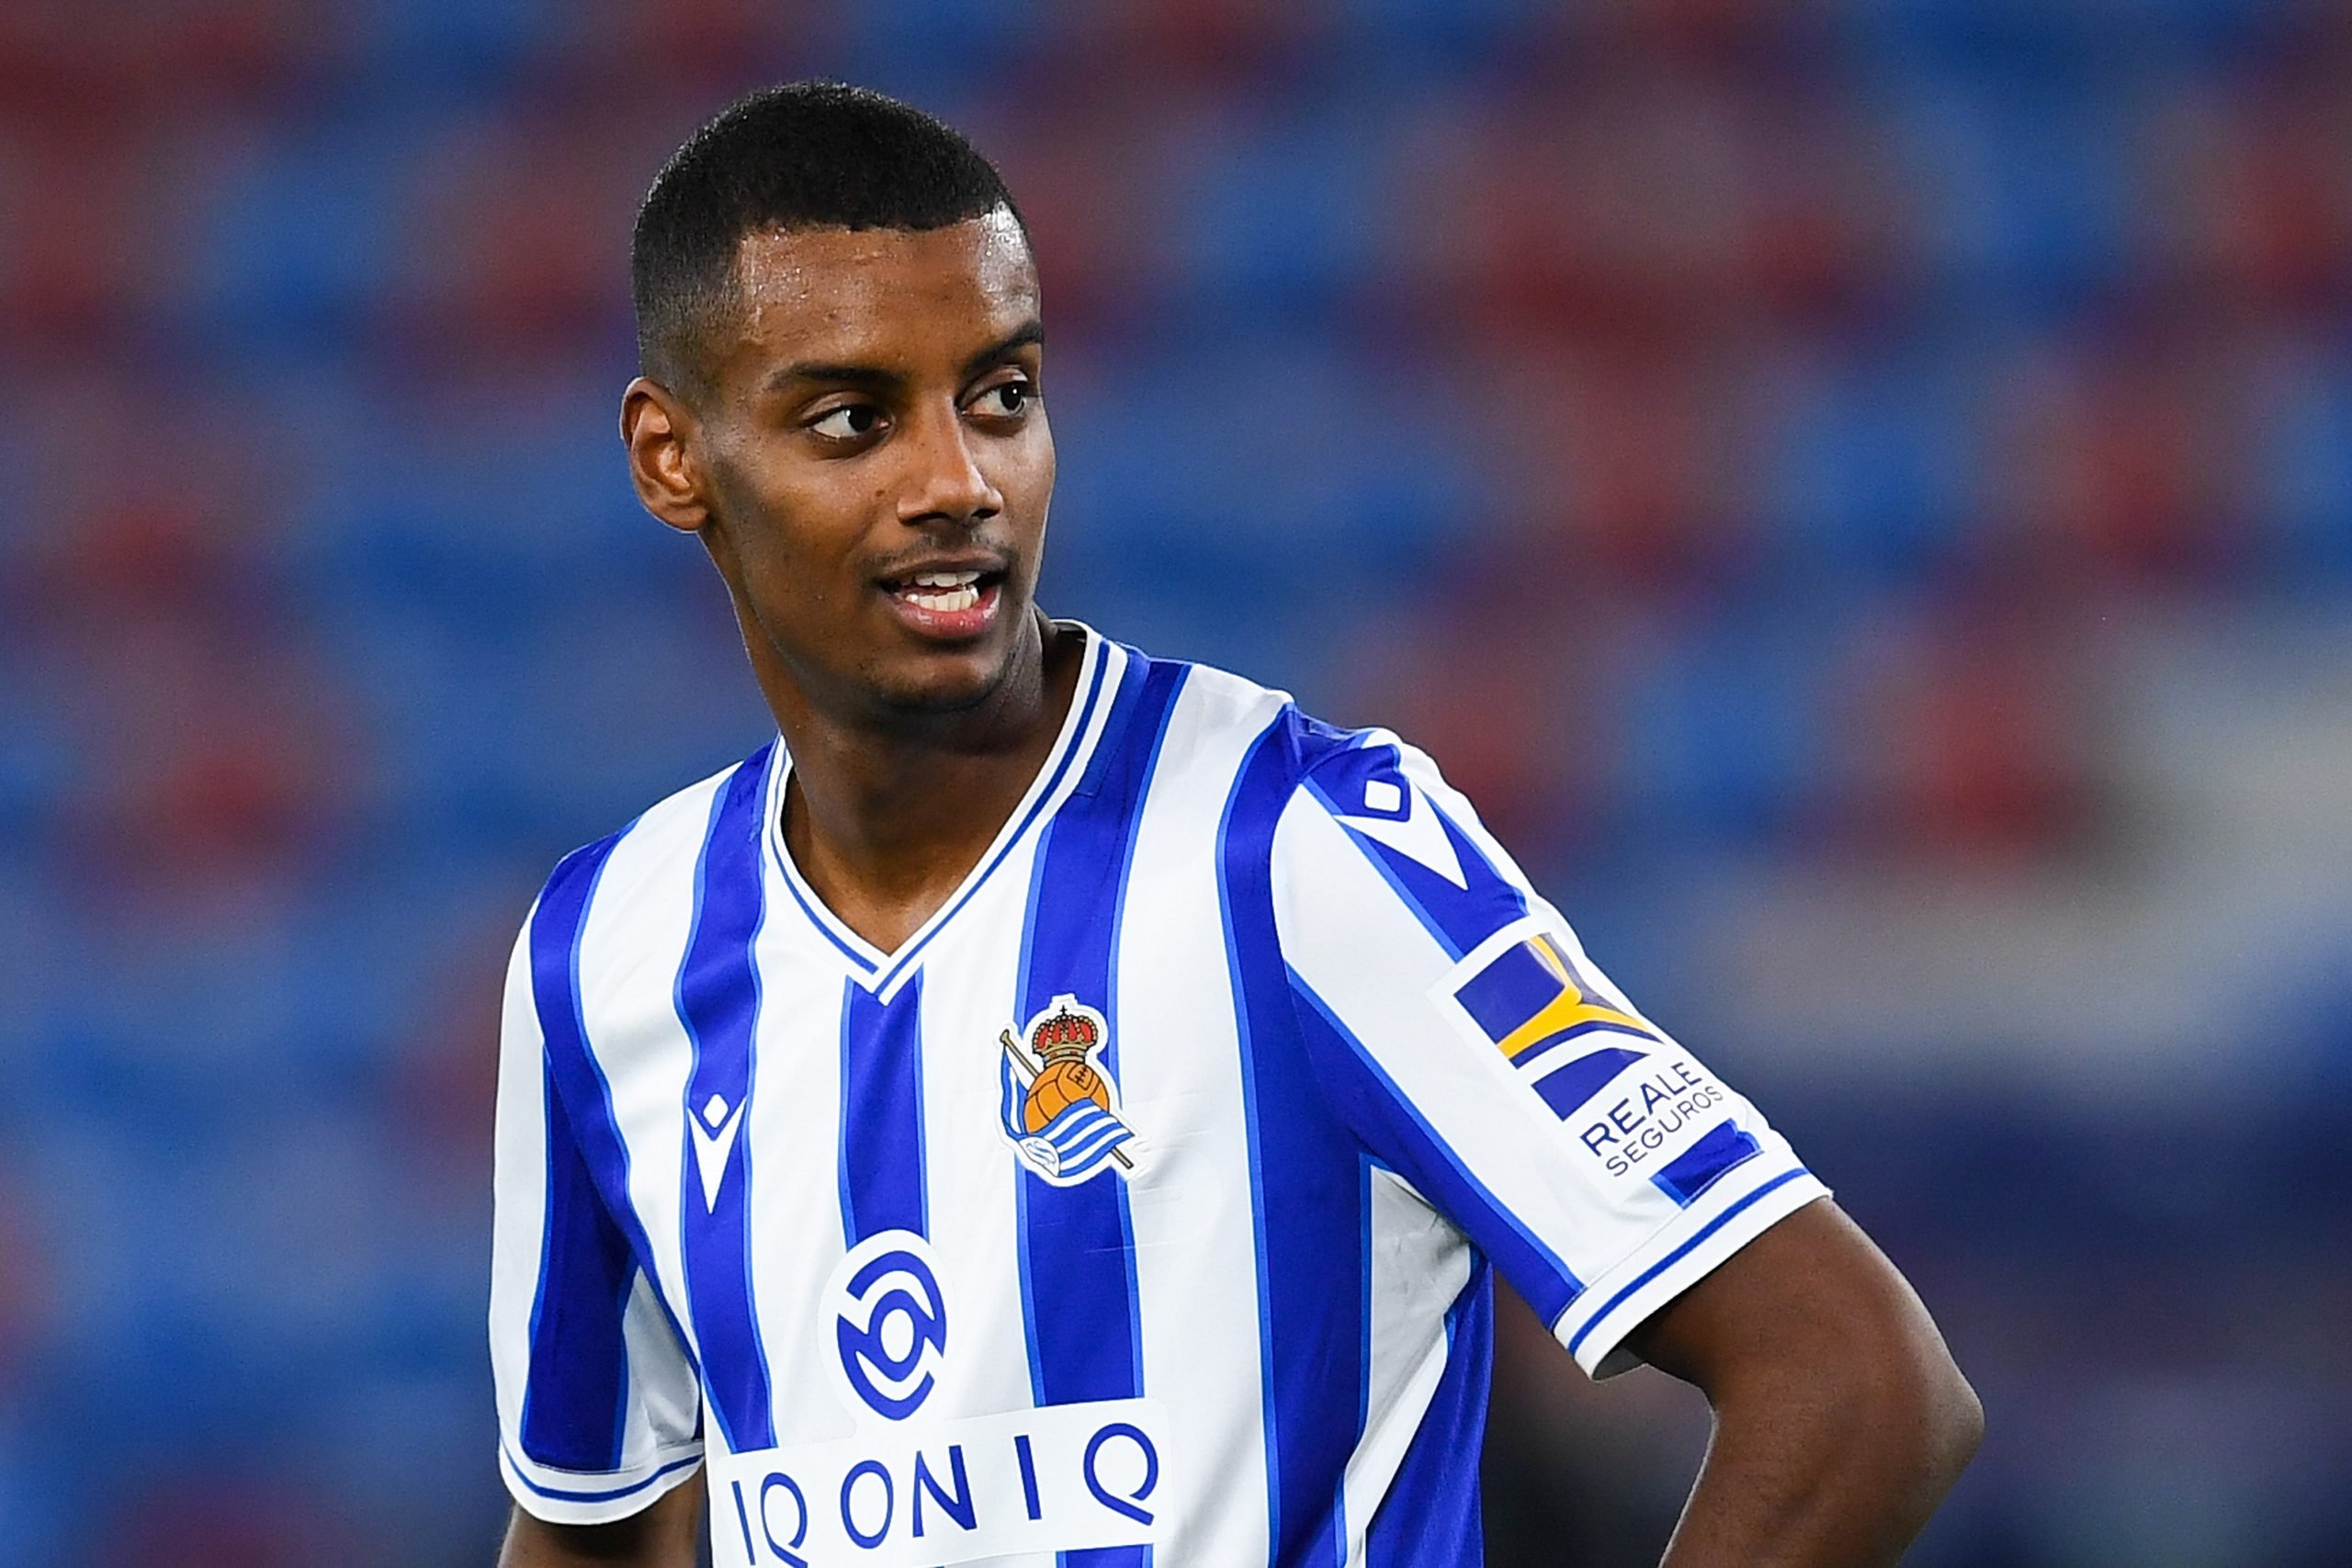 Manchester United news: Alexander Isak's agent told star to join Newcastle